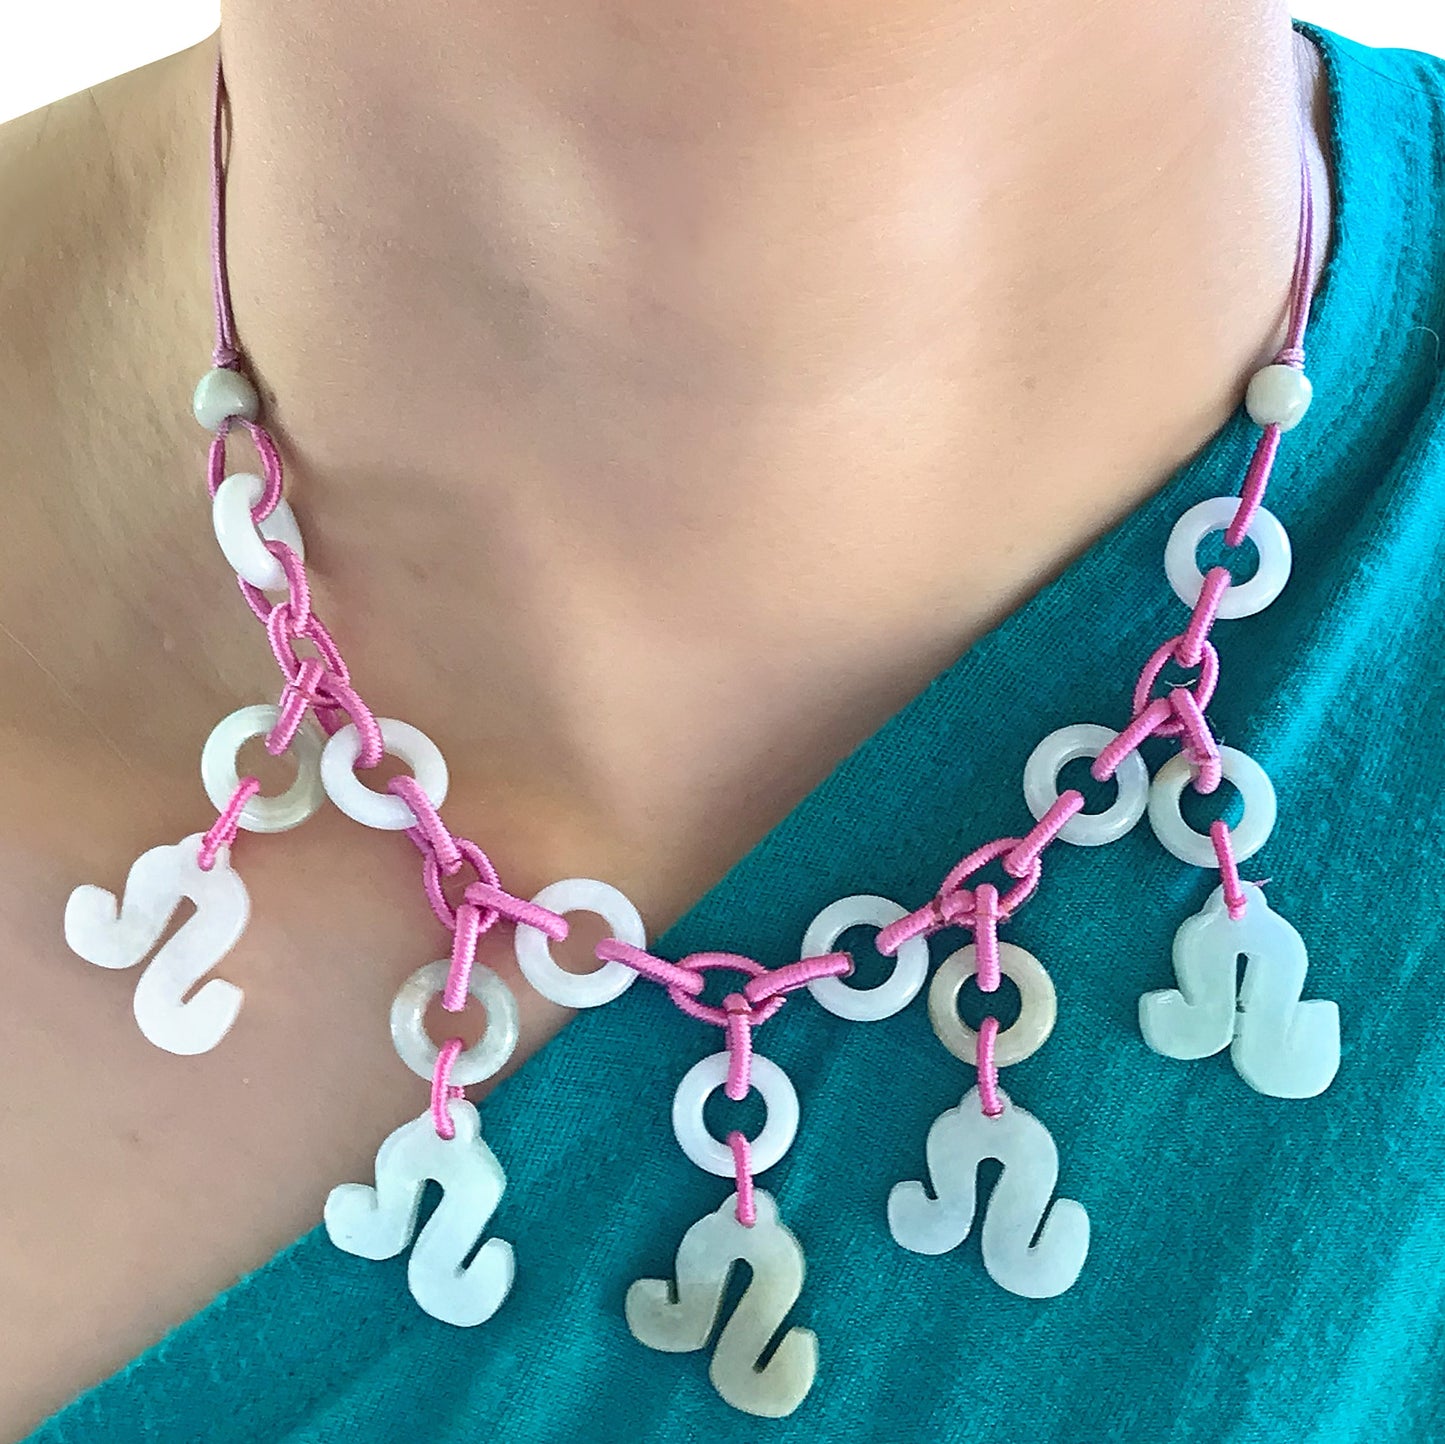 Stand Out with a Uniquely Crafted Leo Handmade Jade Necklace made with Lavender Cord